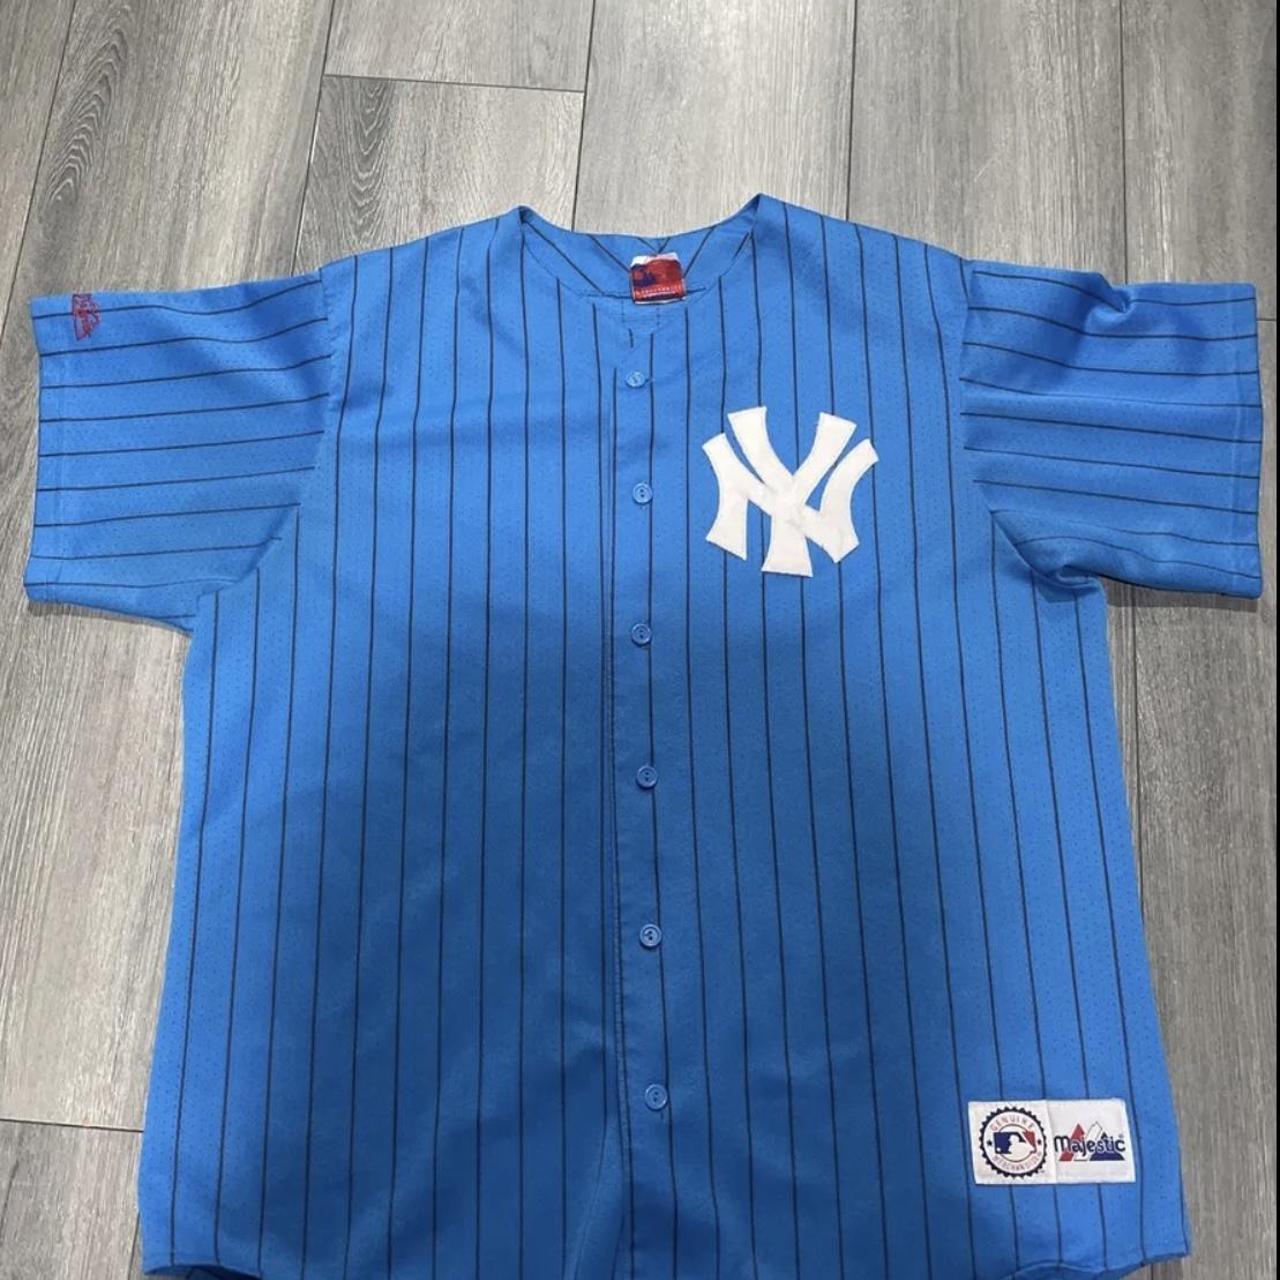 Majestic MLB New York Mets Youth Jersey Size XL Blue - Depop